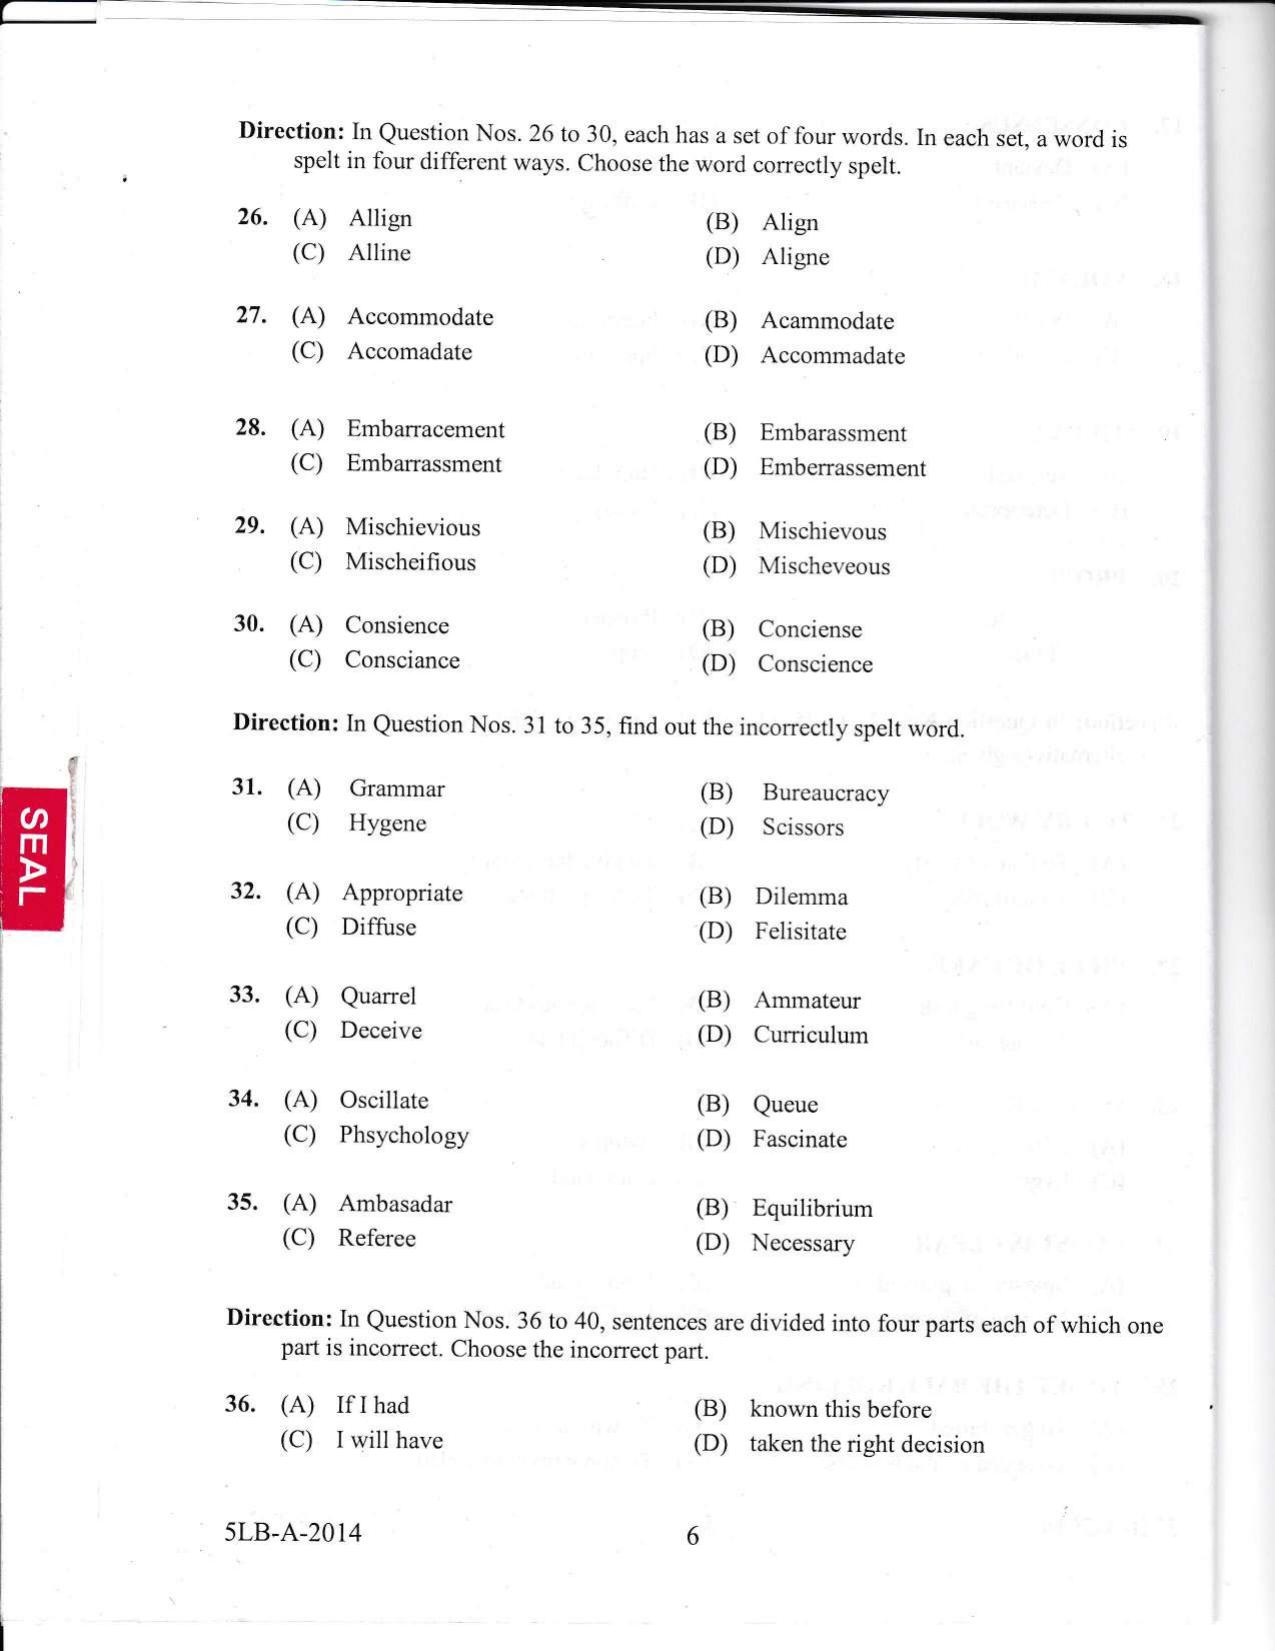 KLEE 5 Year LLB Exam 2014 Question Paper - Page 6